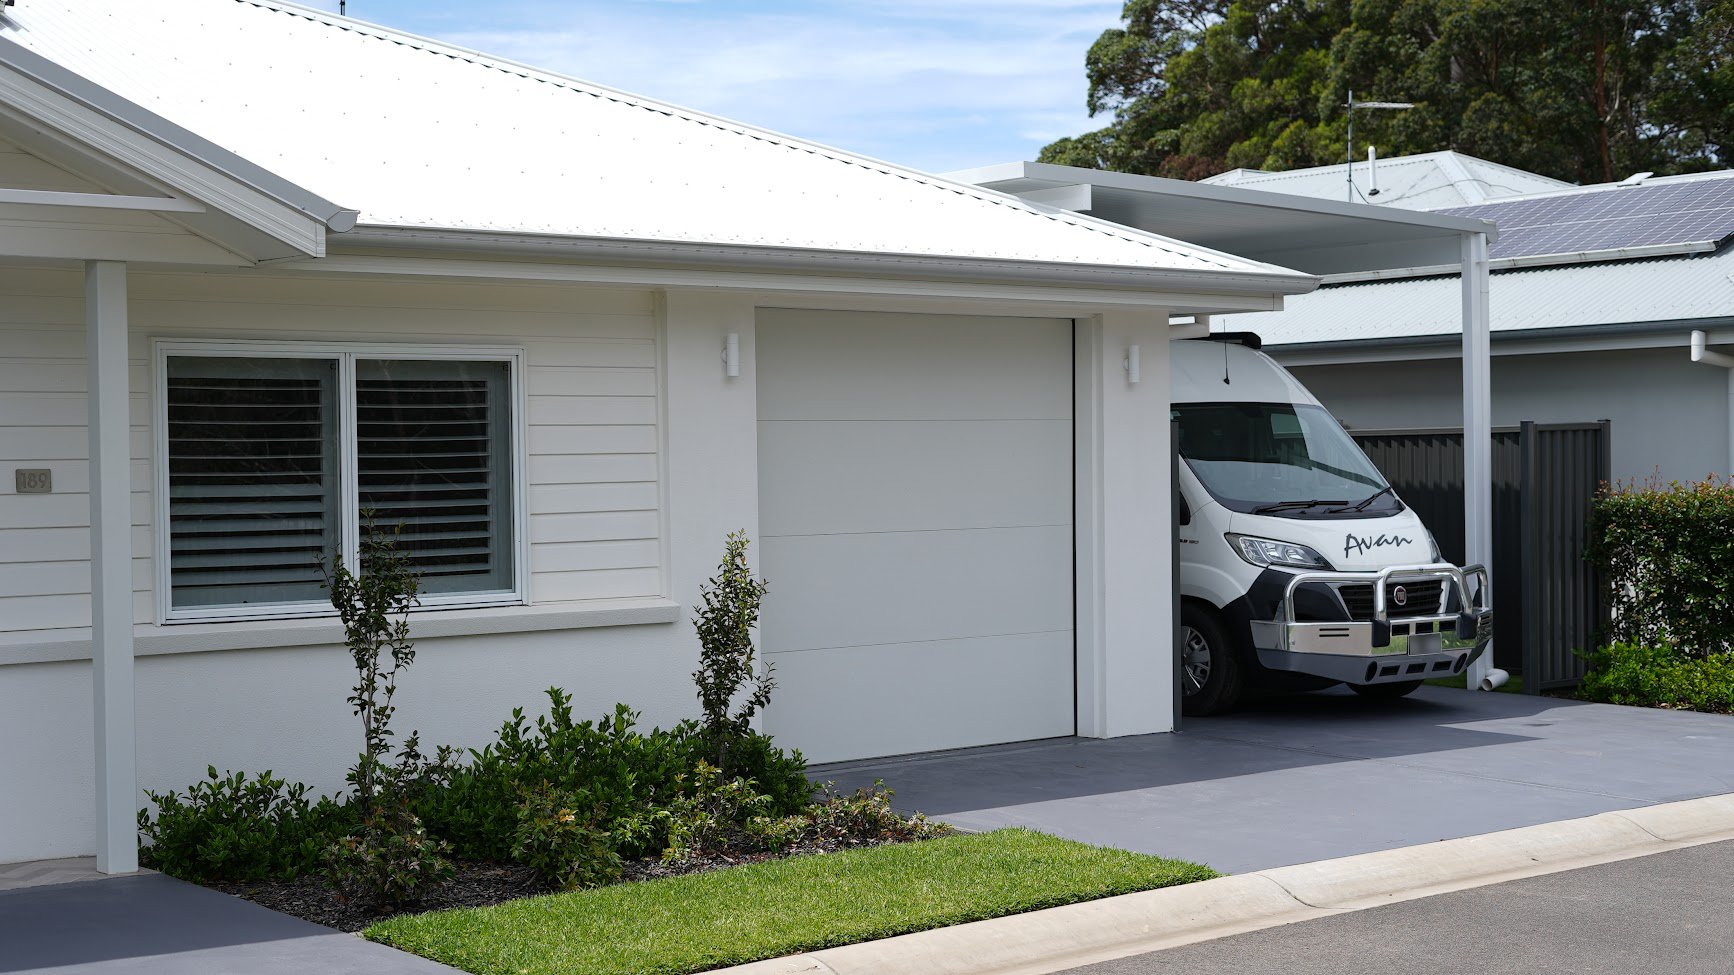 A stylish, custom-built caravan garage by Spanline, thoughtfully designed to seamlessly blend with the existing property.